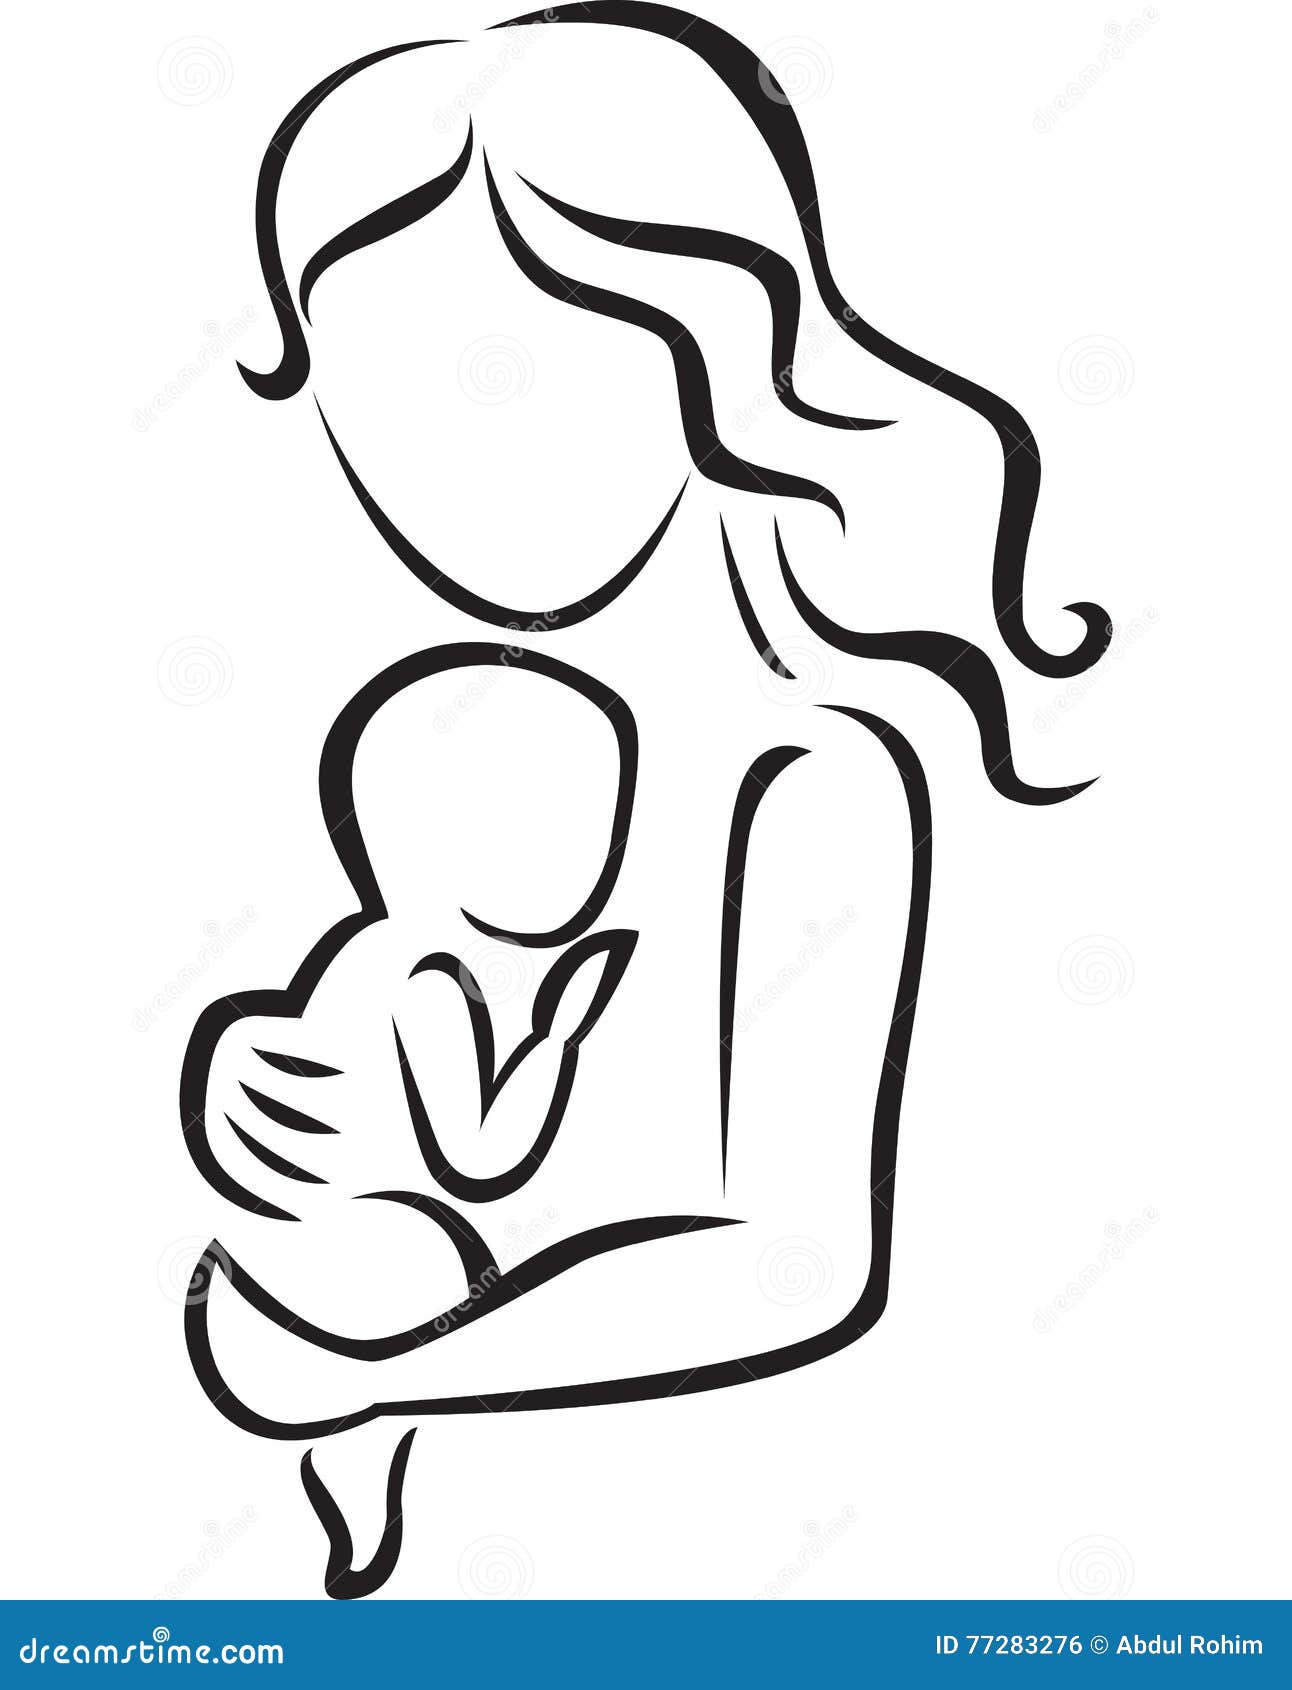 Illustration of Mother and Baby Icon Stock Vector - Illustration of ...